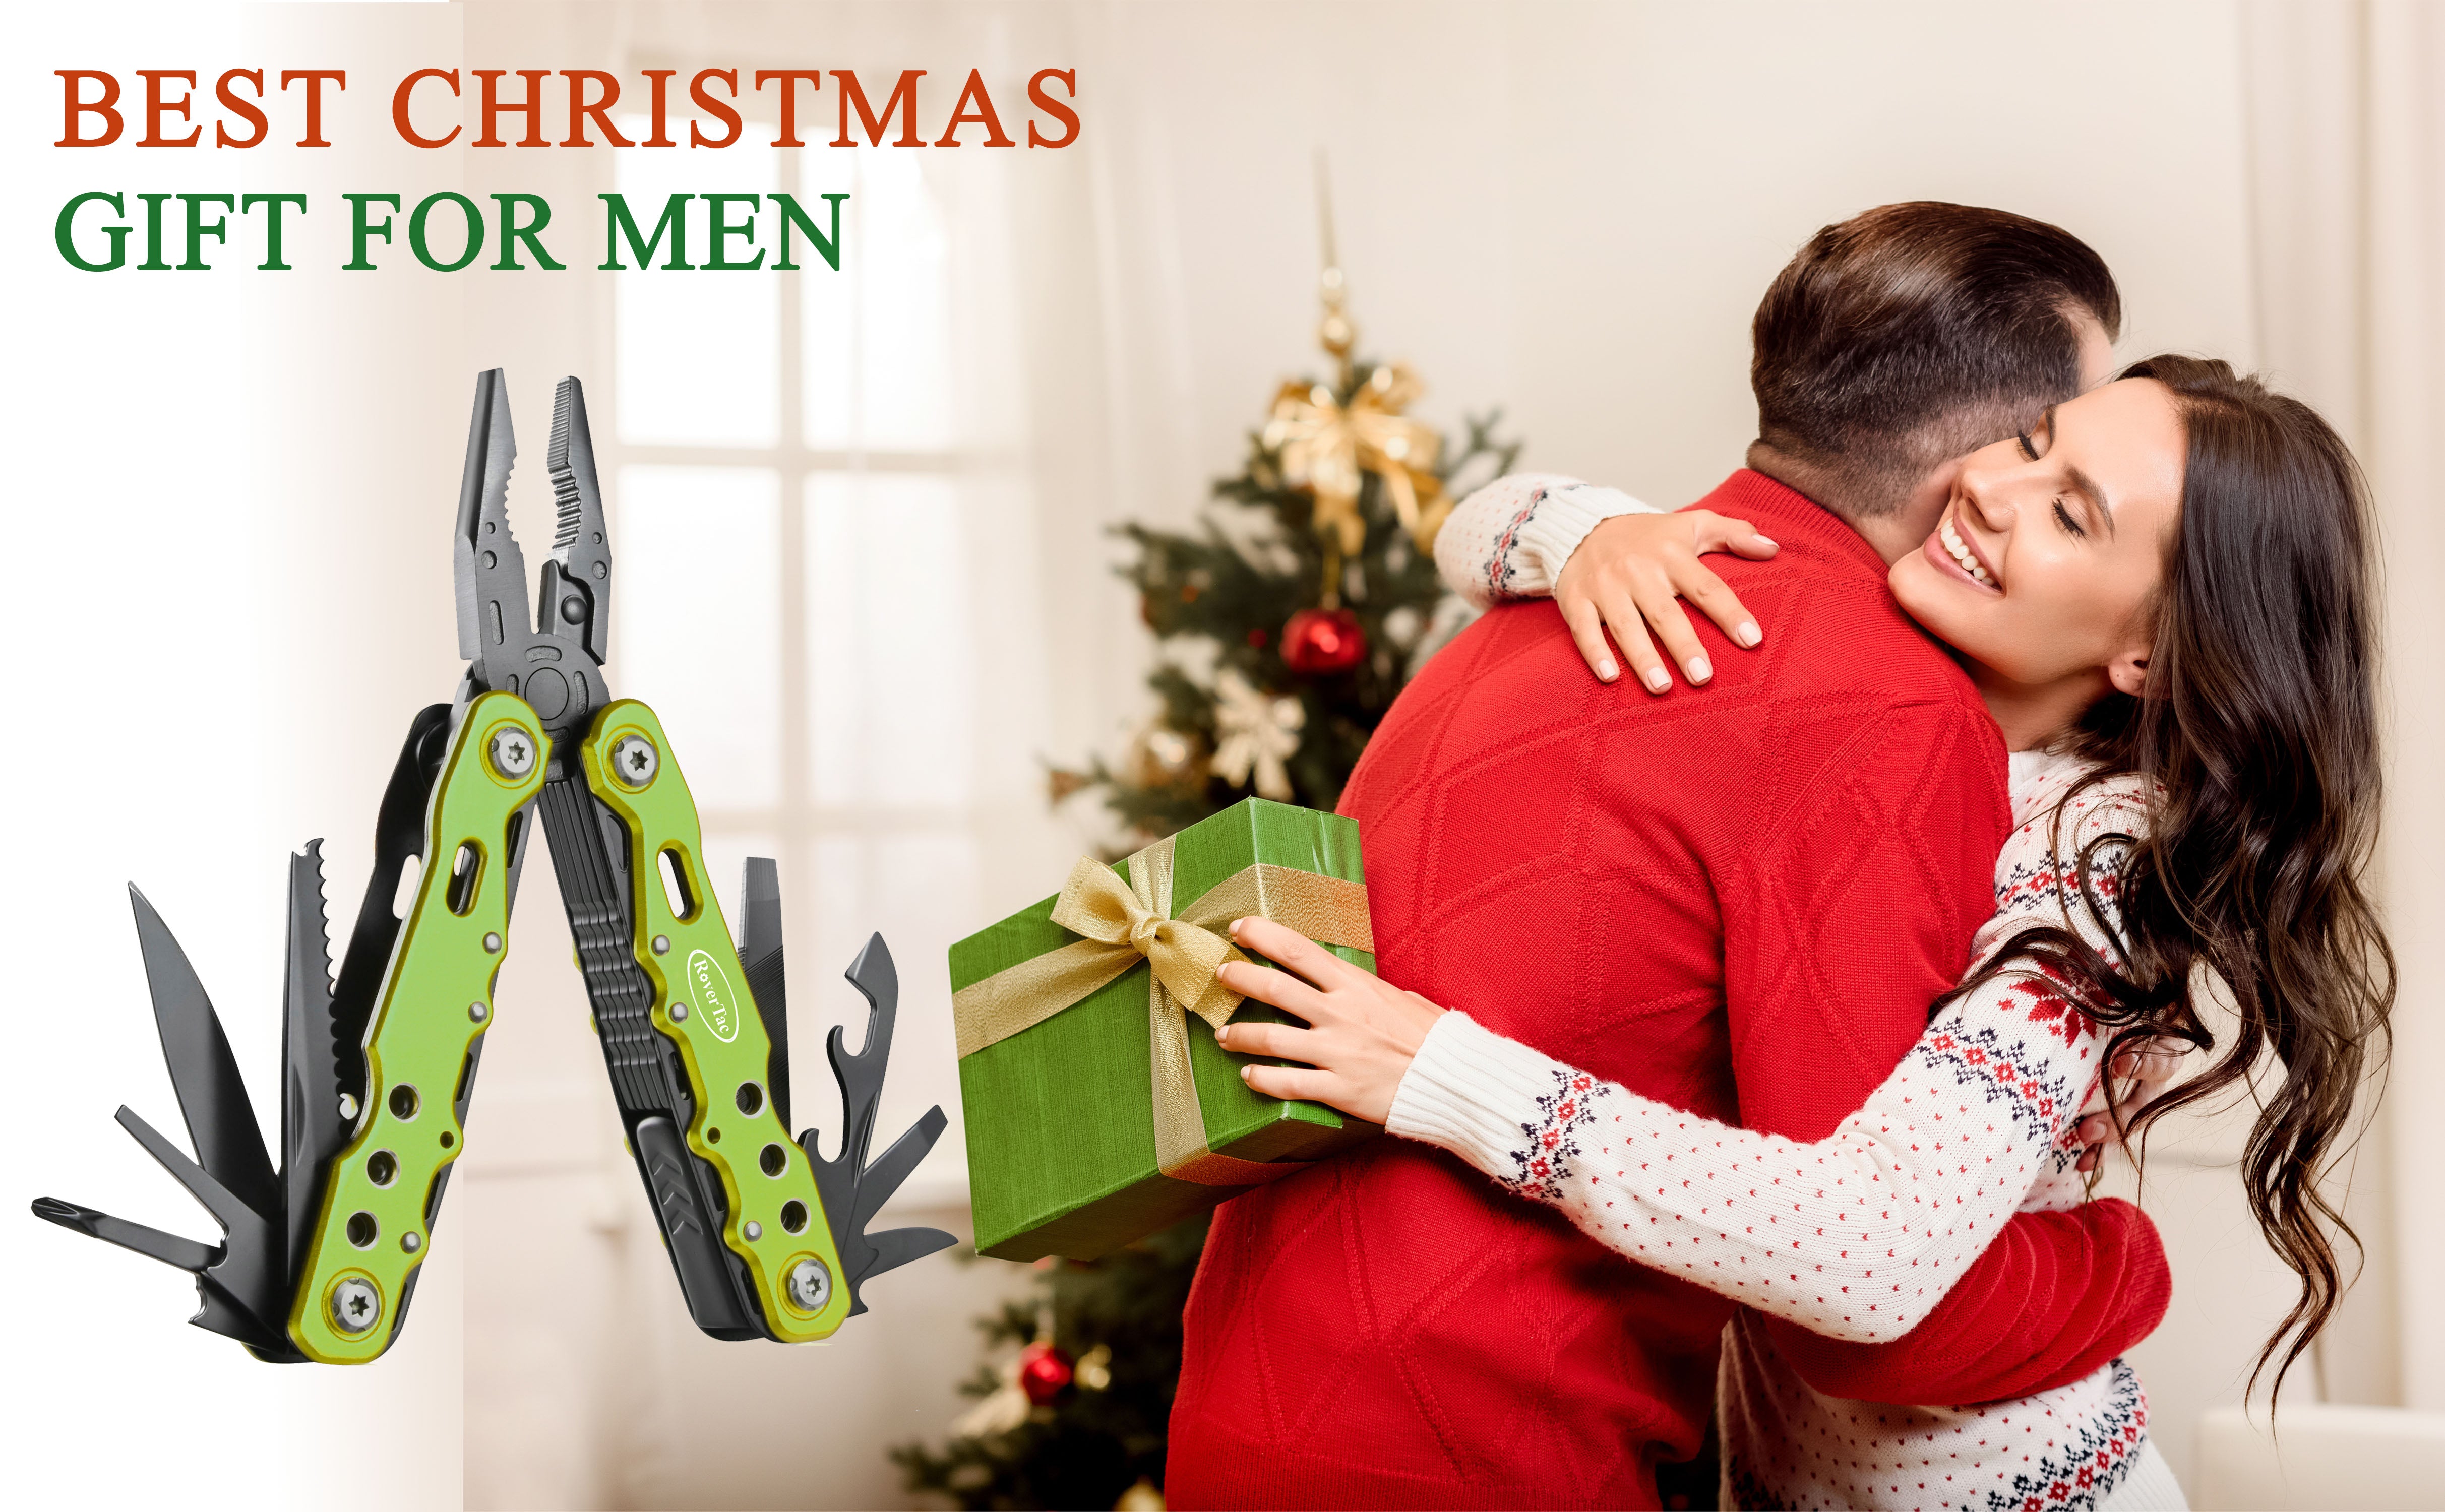 14-in-1 Multitool Pliers-Green Screwdrivers Saw Bottle Opener Perfect for Camping Survival Hiking Repairs